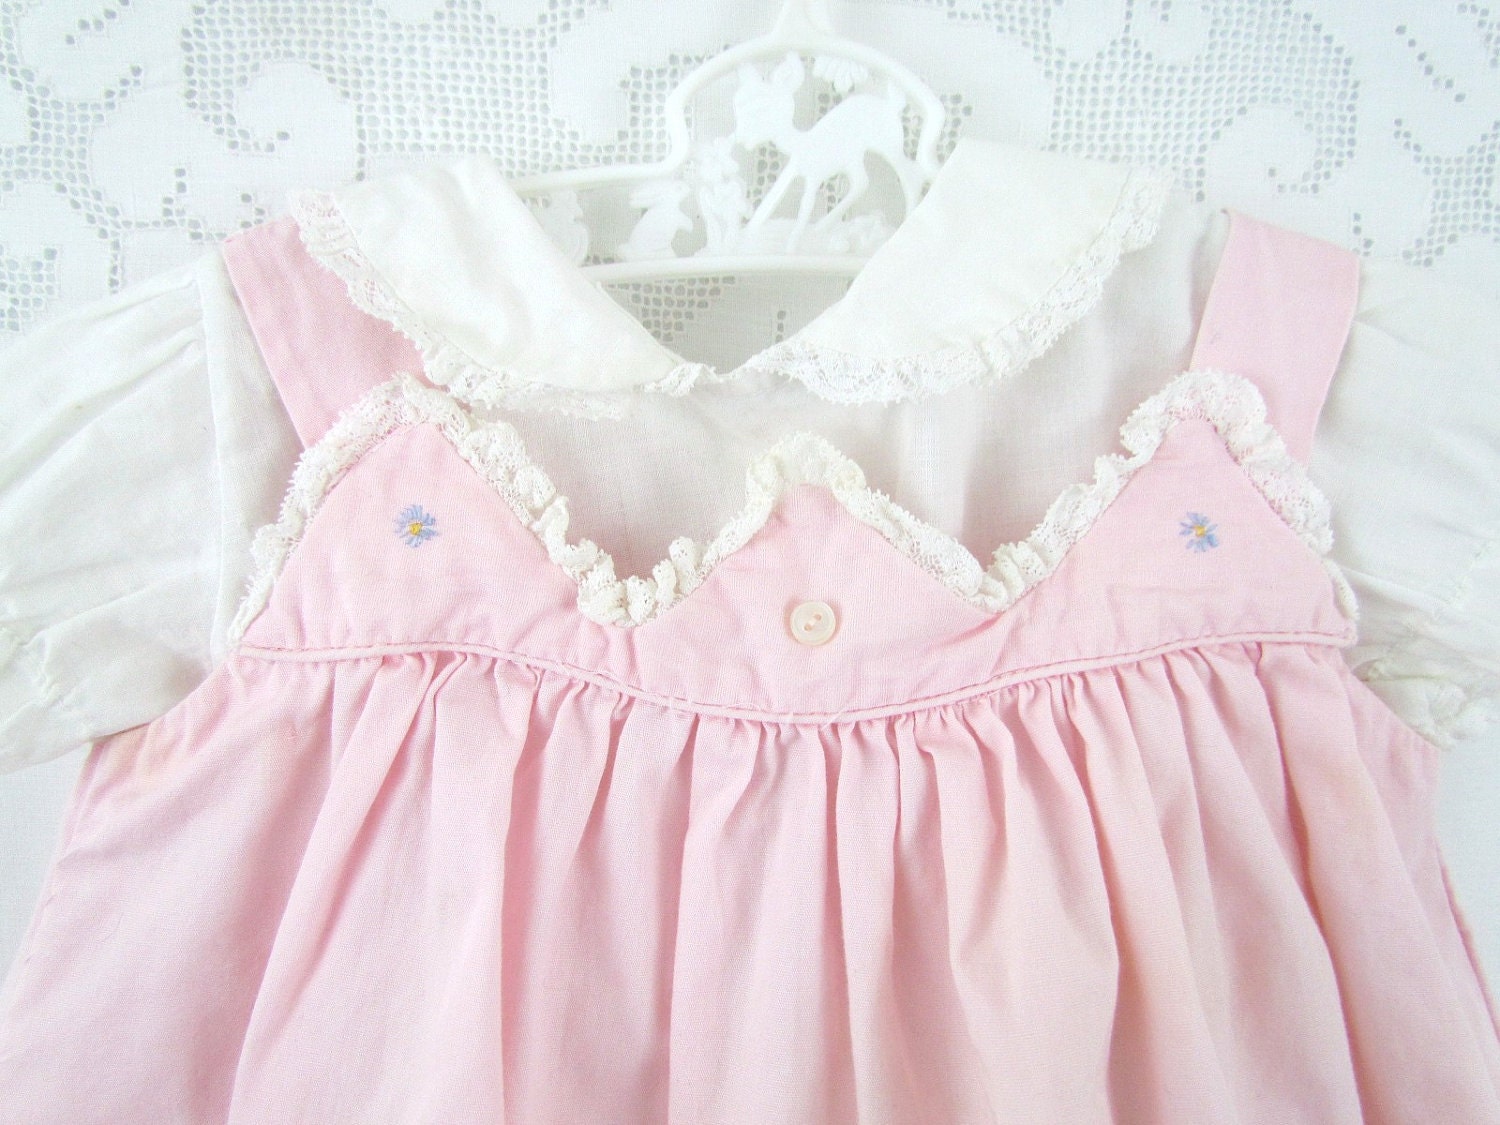 1940's Baby Dress with Blouse Heirloom Lace by VintagePolkaDotcom